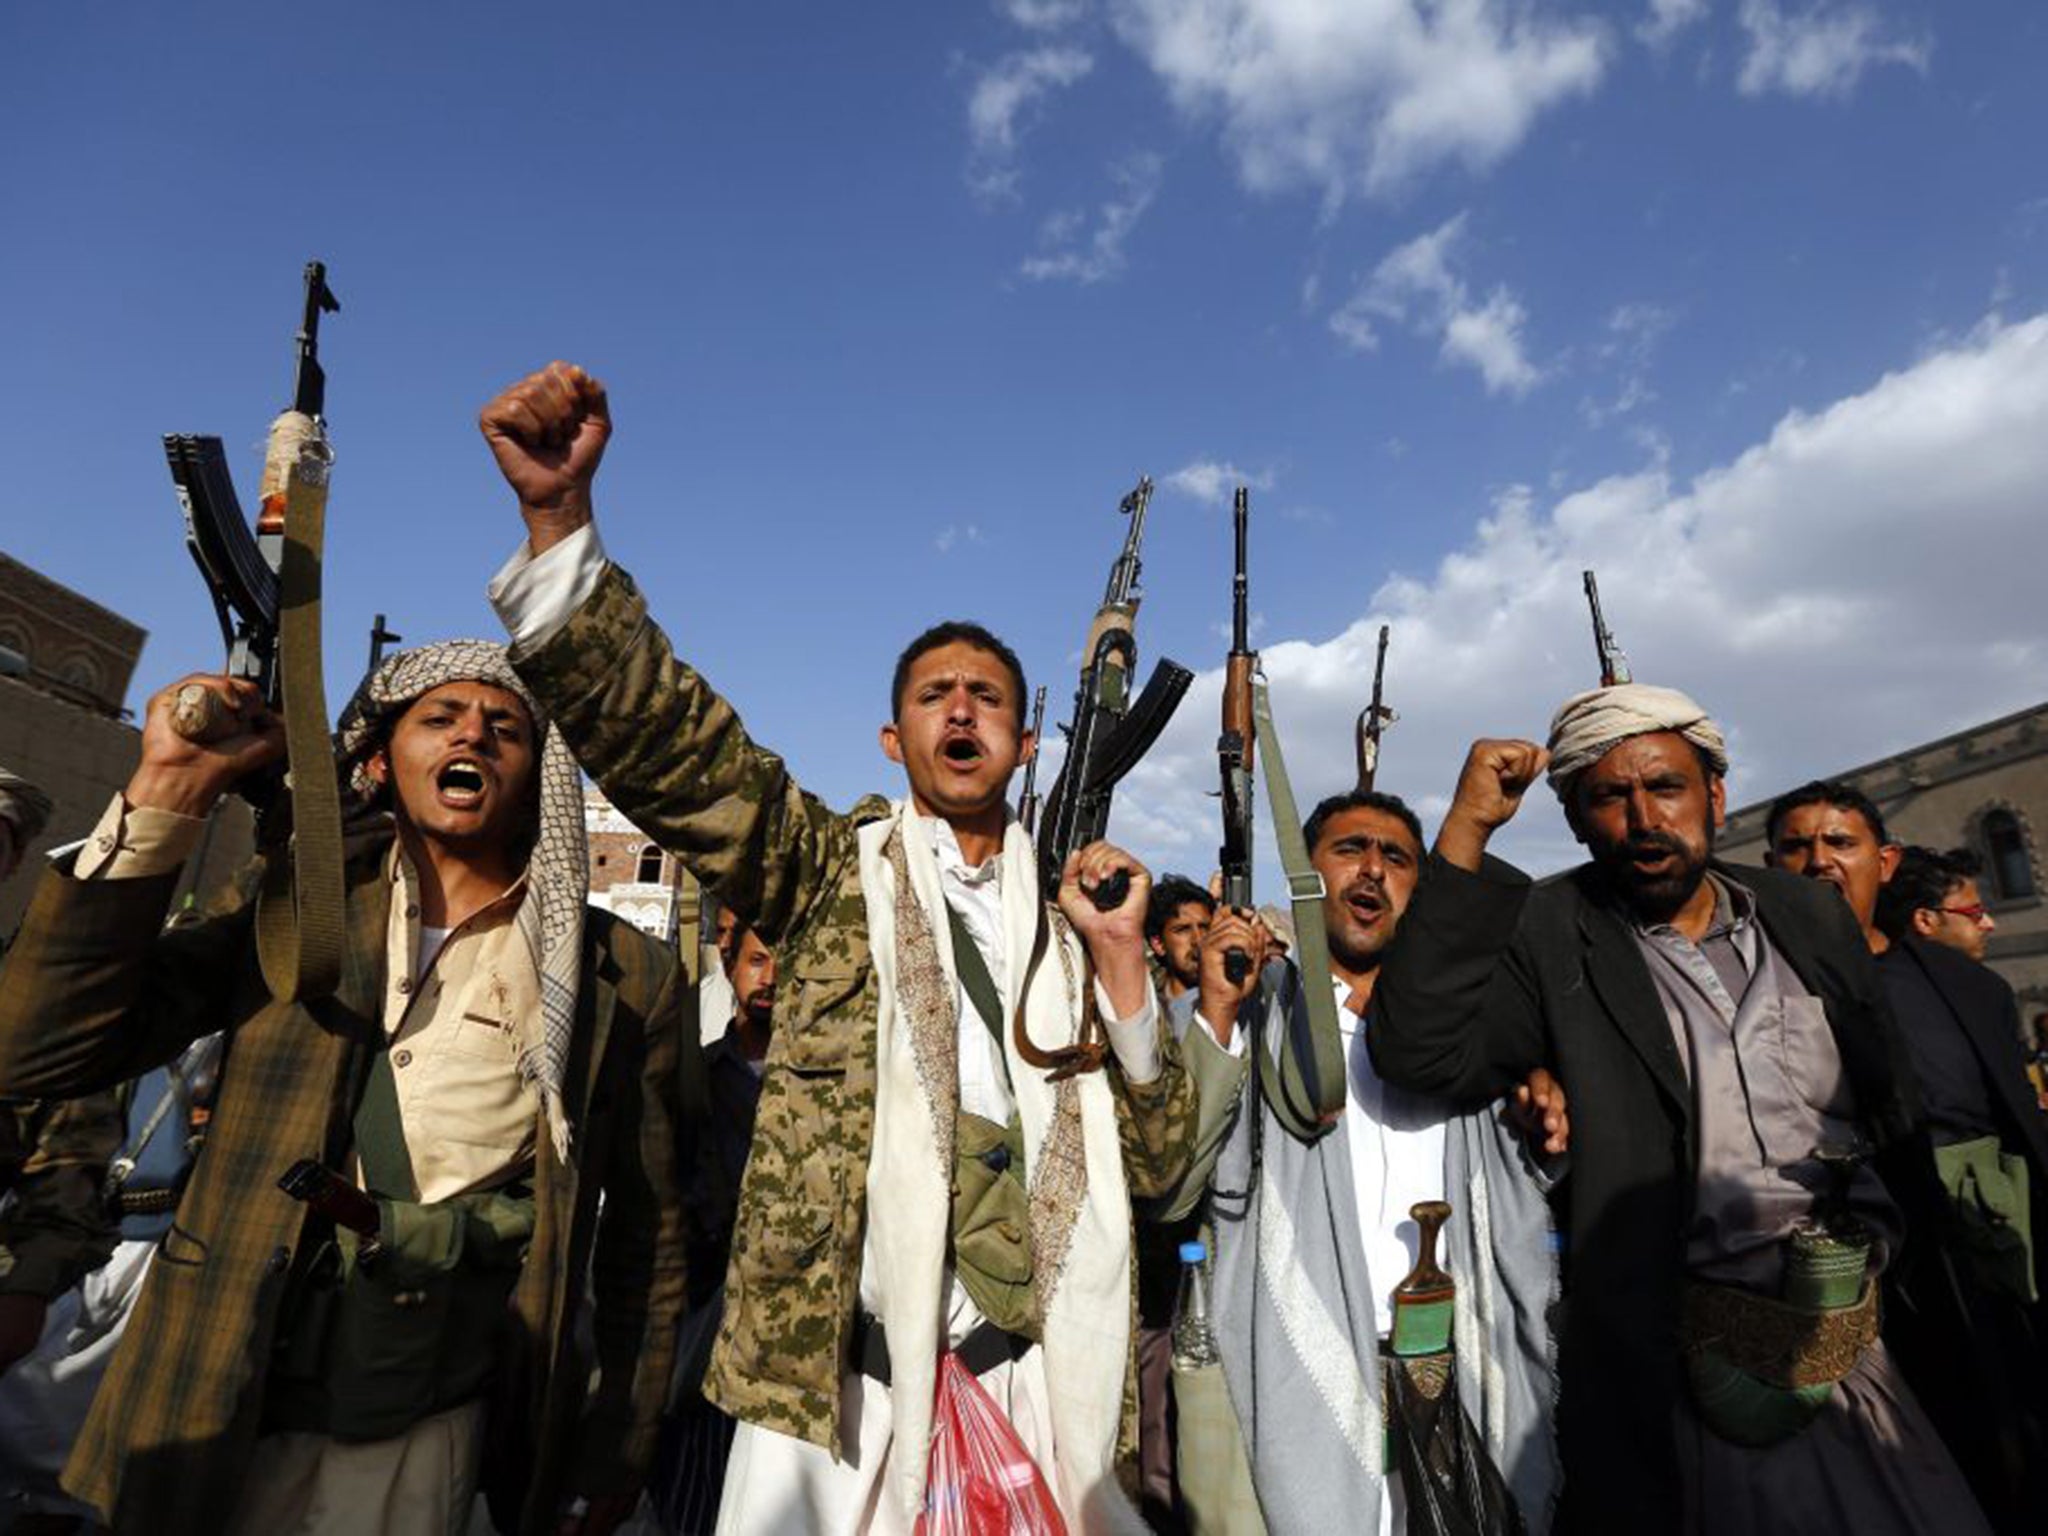 The Houthis, who come from the Zaidi tribes in Yemen’s northern mountains, have an effective military and political movement called Ansar Allah, modelled on Hezbollah